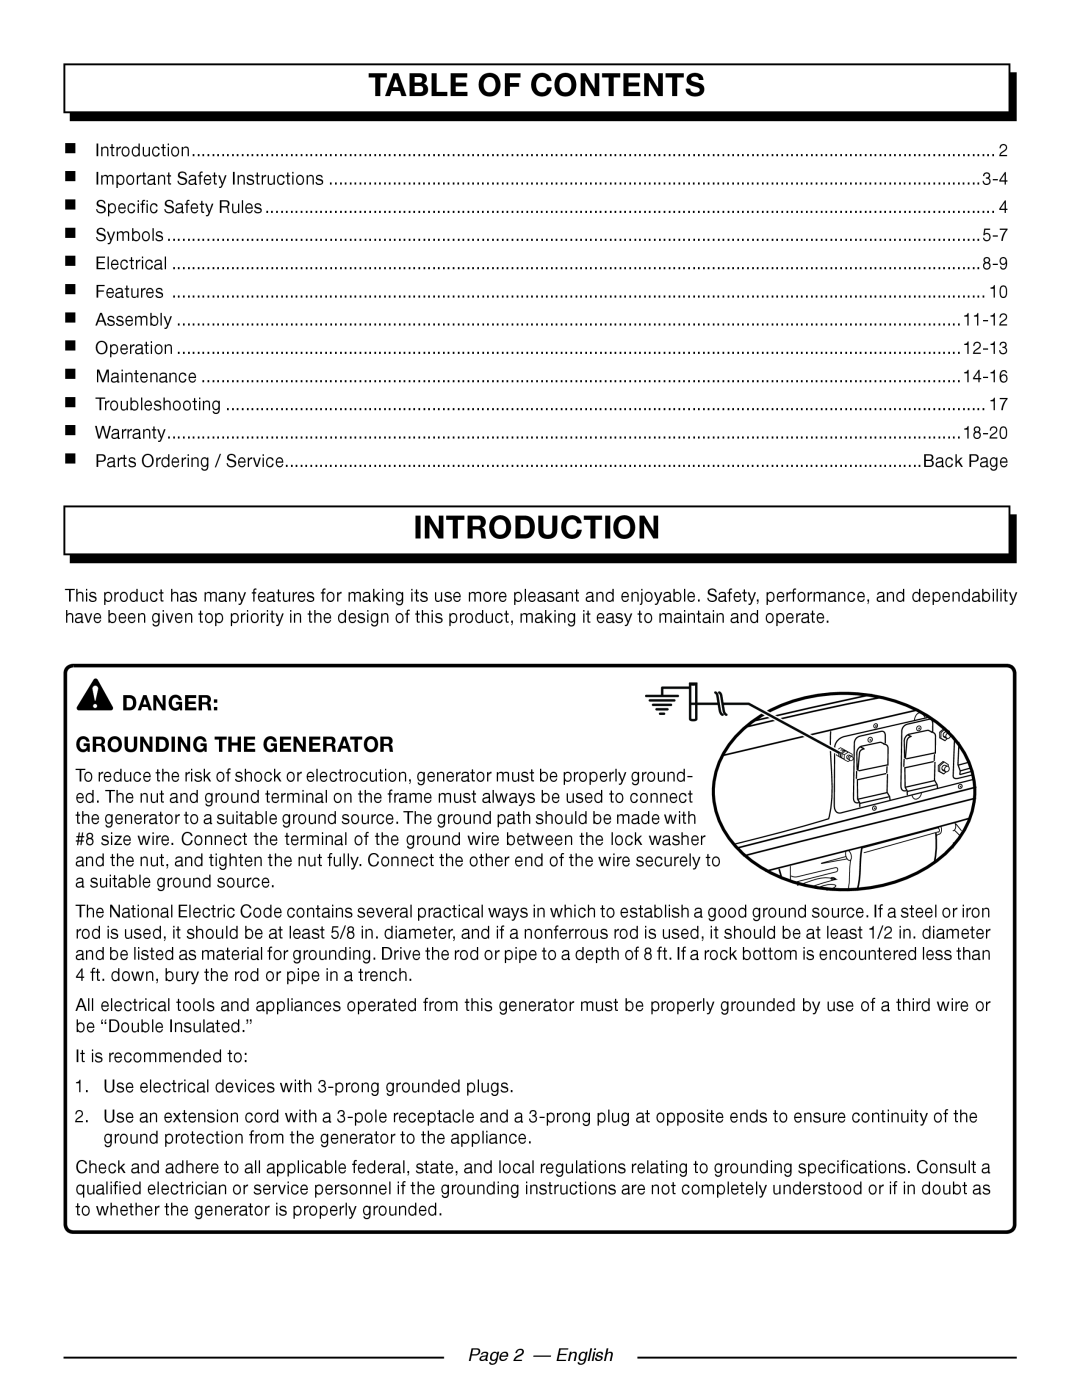 Homelite UT905011 manuel dutilisation Introduction, Table Of Contents, Danger Grounding The Generator, Page 2 — English 